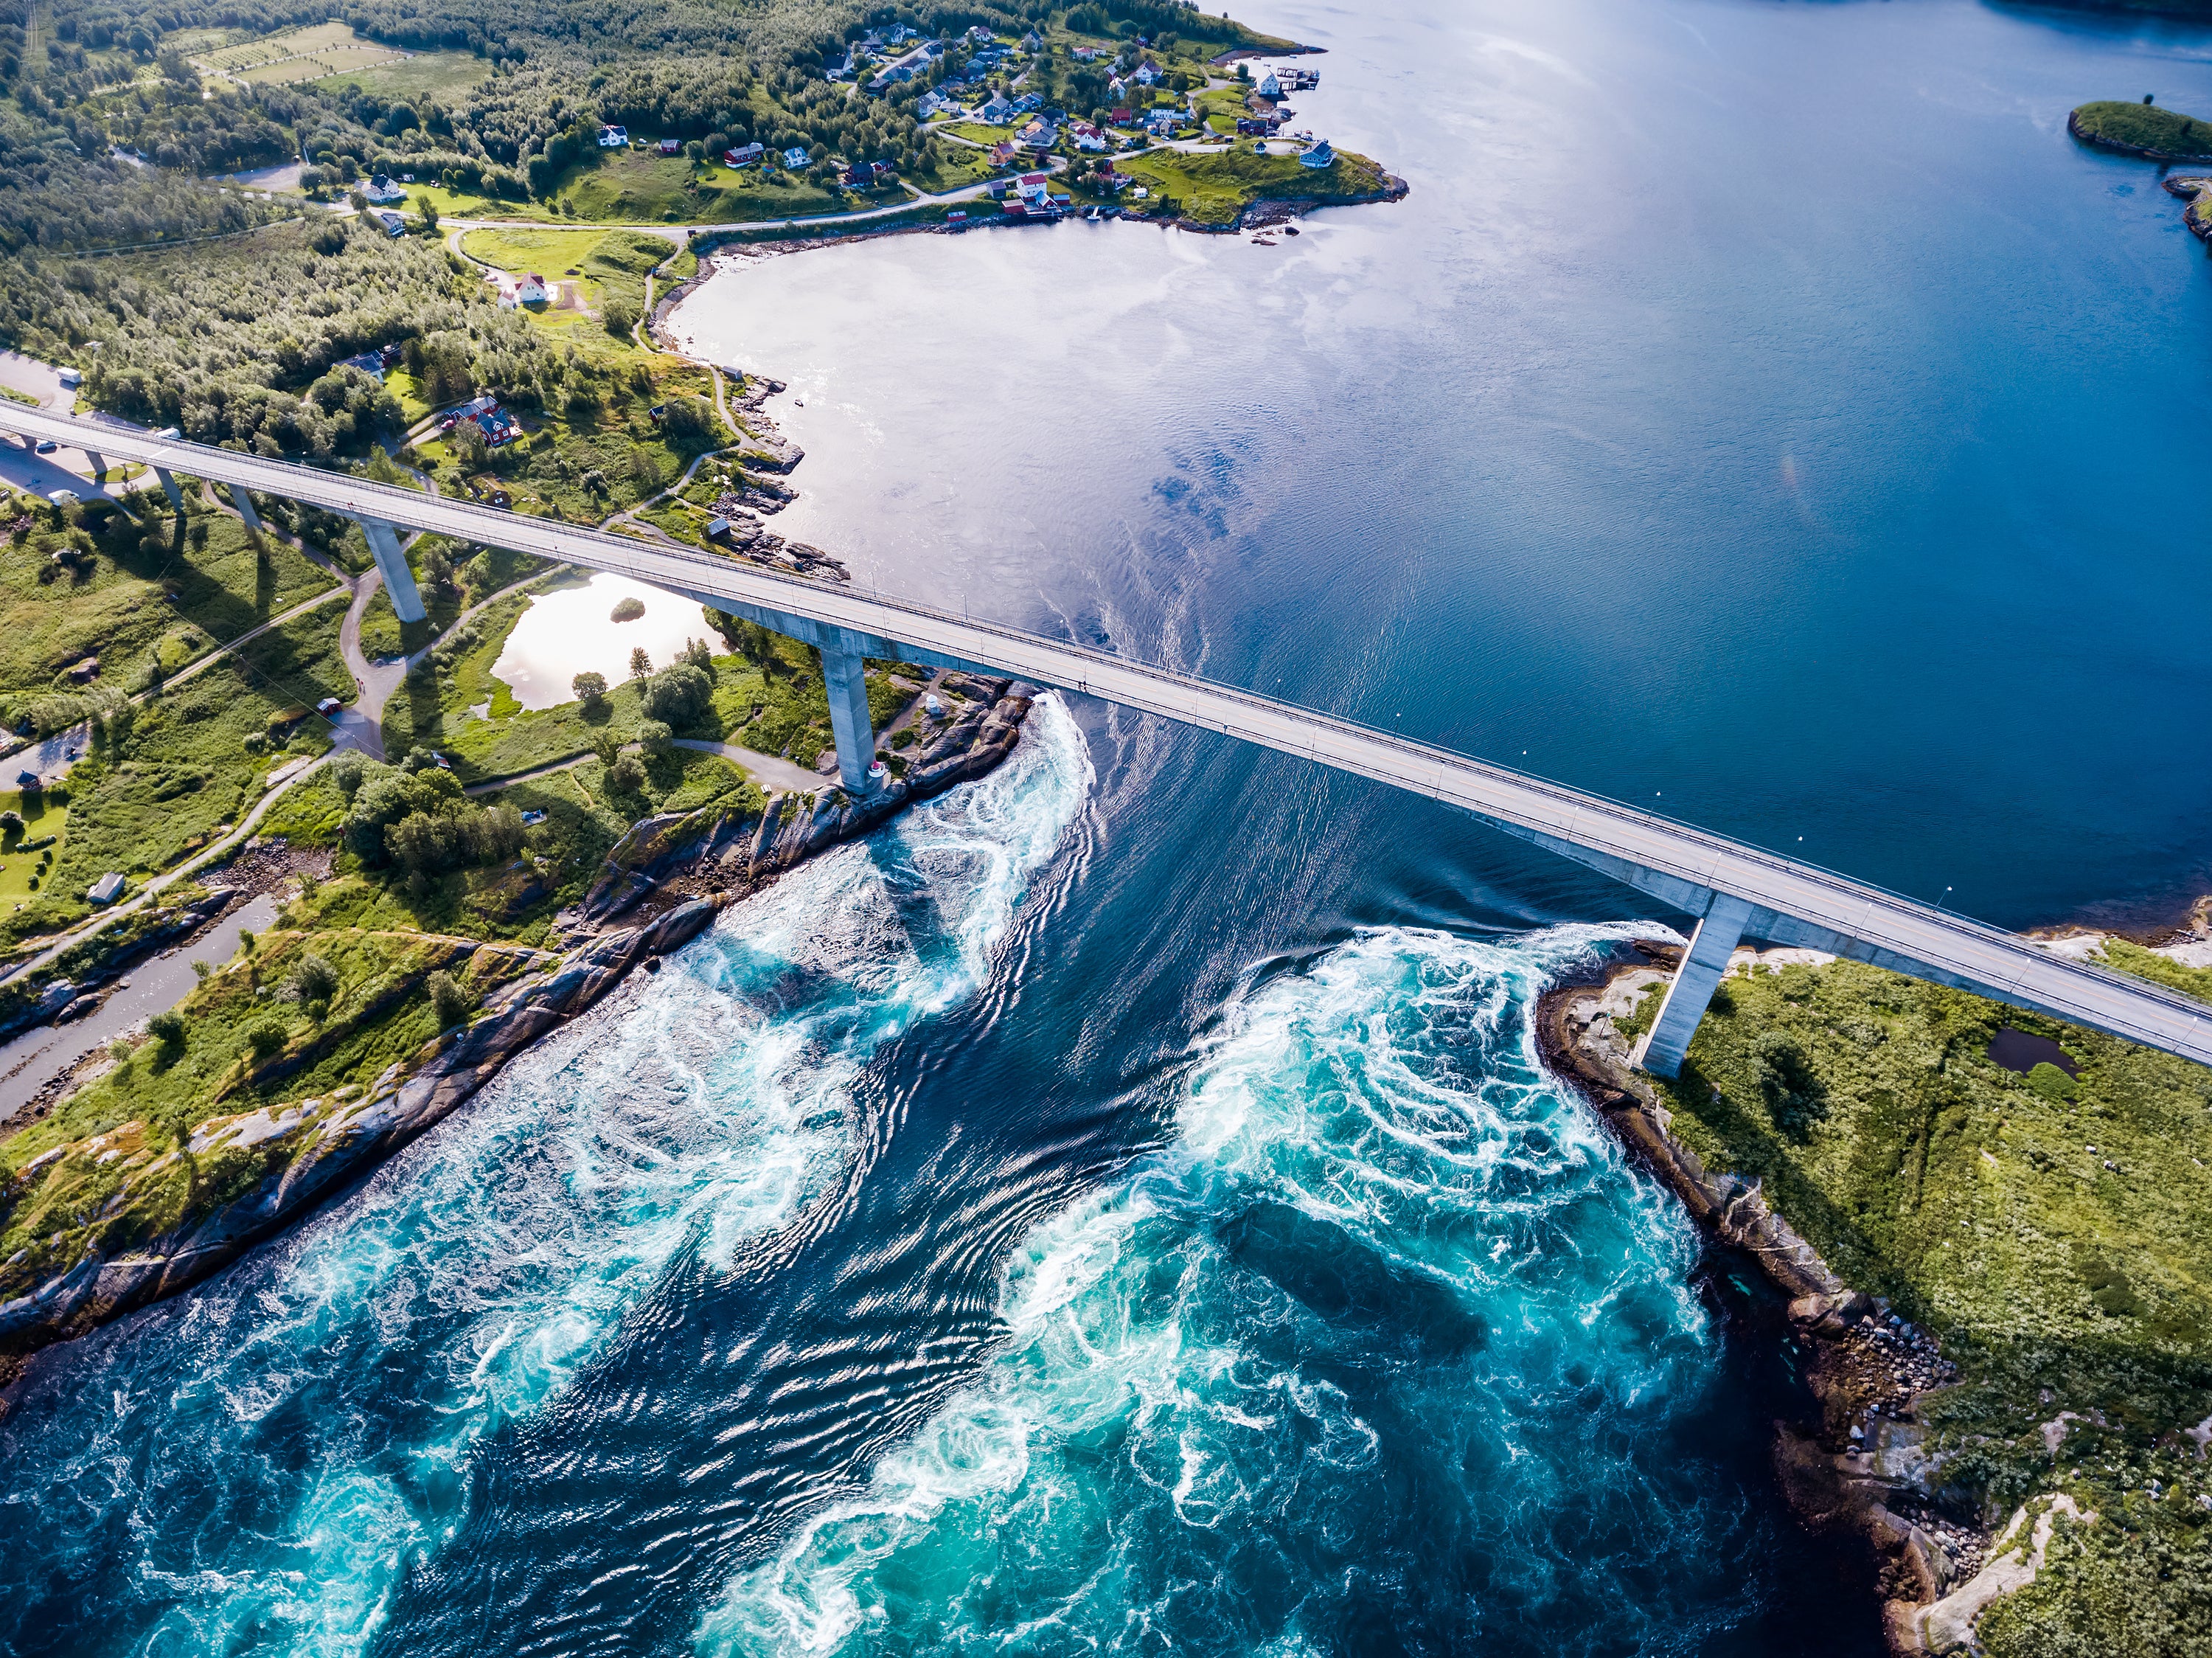 The world’s strongest tidal current, Saltstraumen, refreshes the water in the fjord at least twice a year